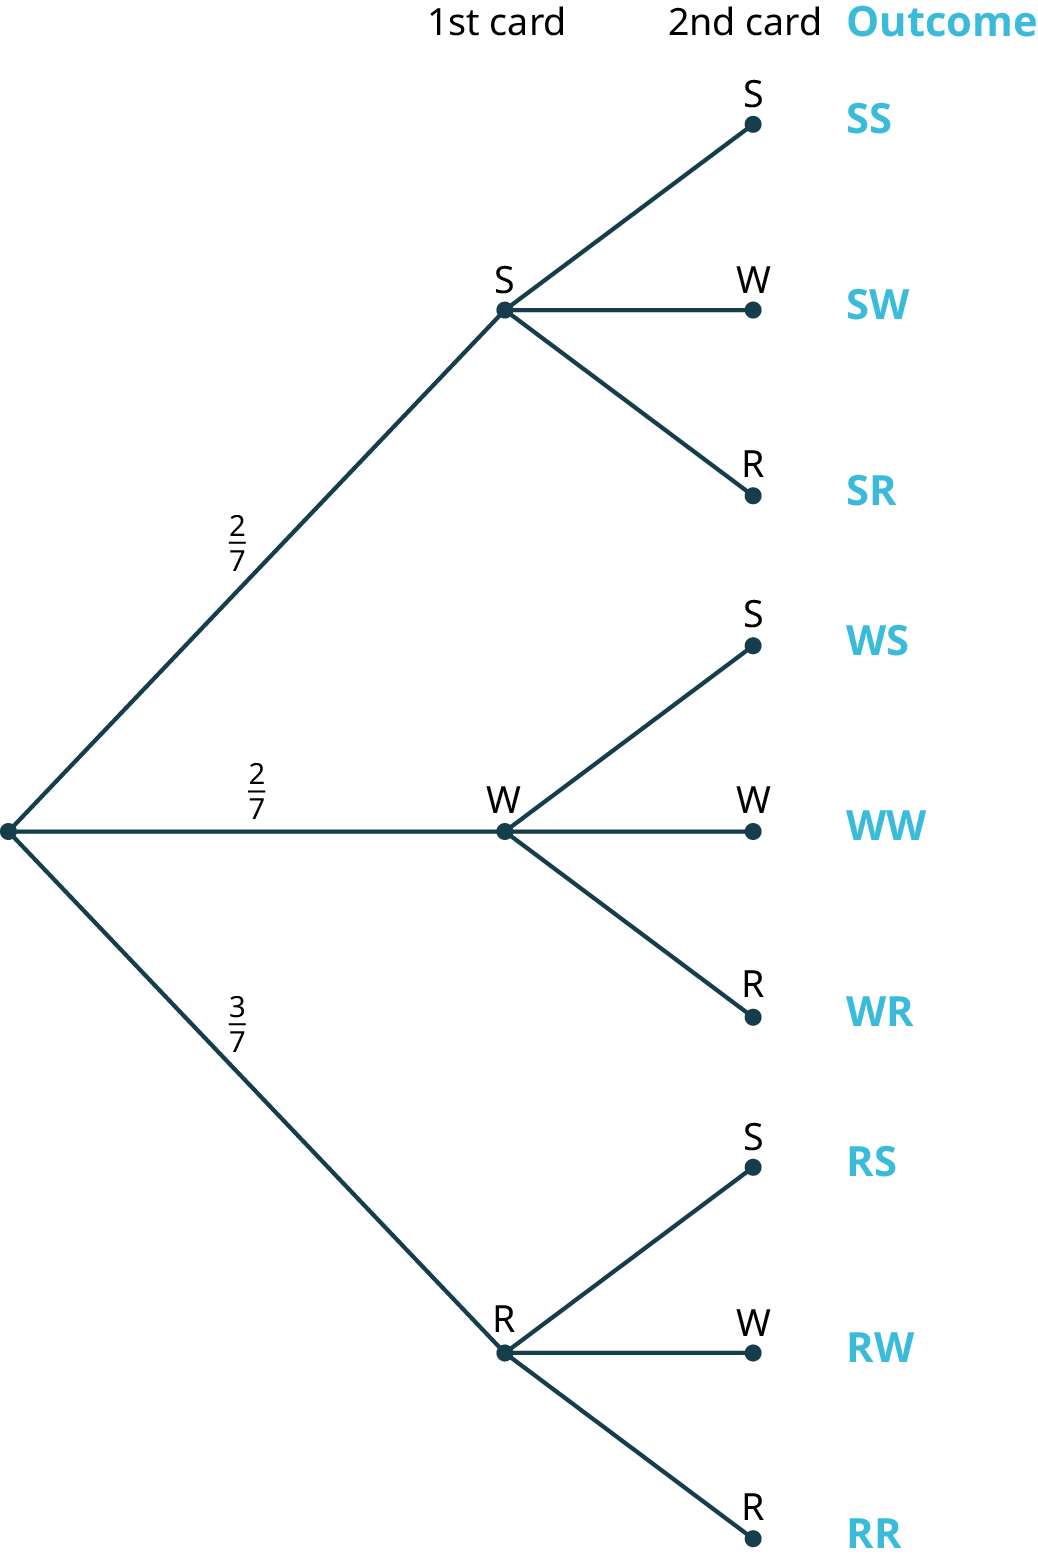 A tree diagram with three stages. The diagram shows a node in the first stage branching into three nodes labeled S, W, and R in the second stage with the probabilities, two-sevenths, two-sevenths, and three-sevenths, respectively. The second stage represents the first card. The third stage representing the second card is as follows. The node, S branches into three nodes labeled S, W, and R. The node, W branches into three nodes labeled S, W, and R. The node, R branches into three nodes labeled S, W, and R. The possible outcomes are as follows: S S, S W, S R, W S, W W, W R, R S, R W, and R R.